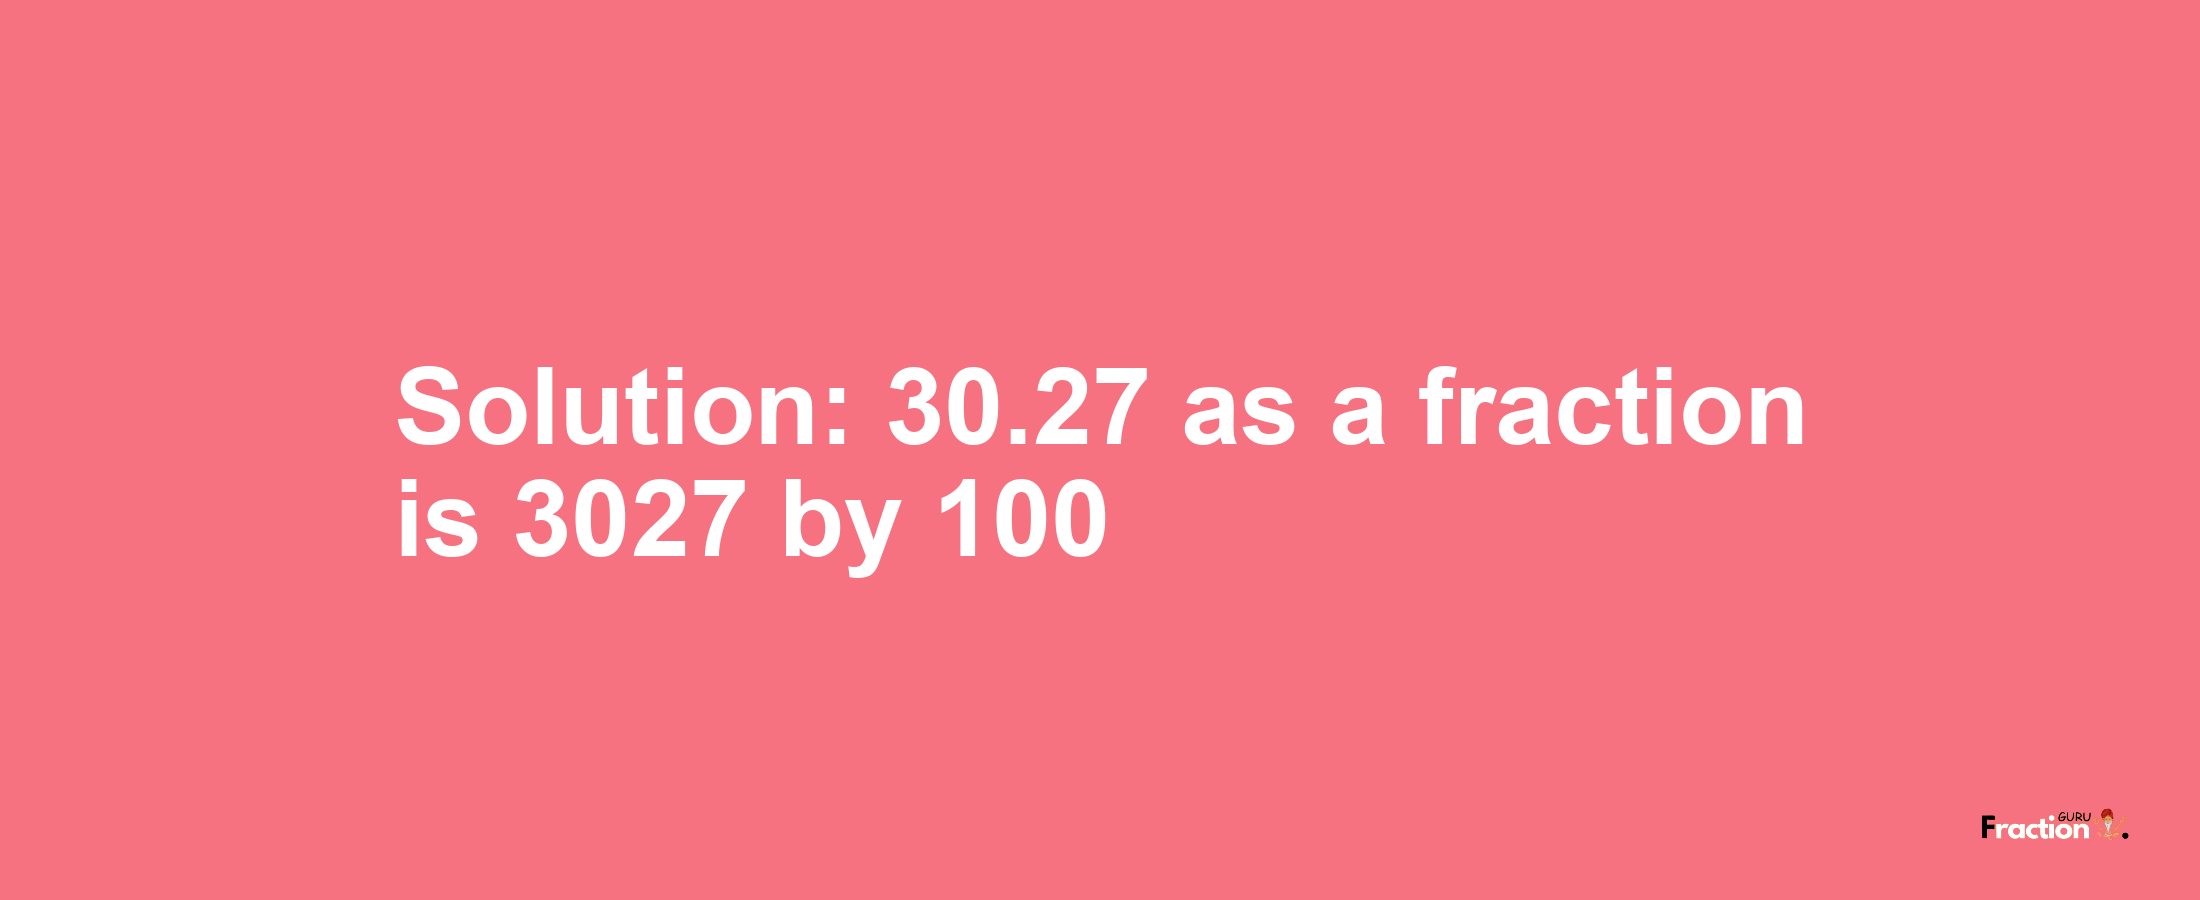 Solution:30.27 as a fraction is 3027/100